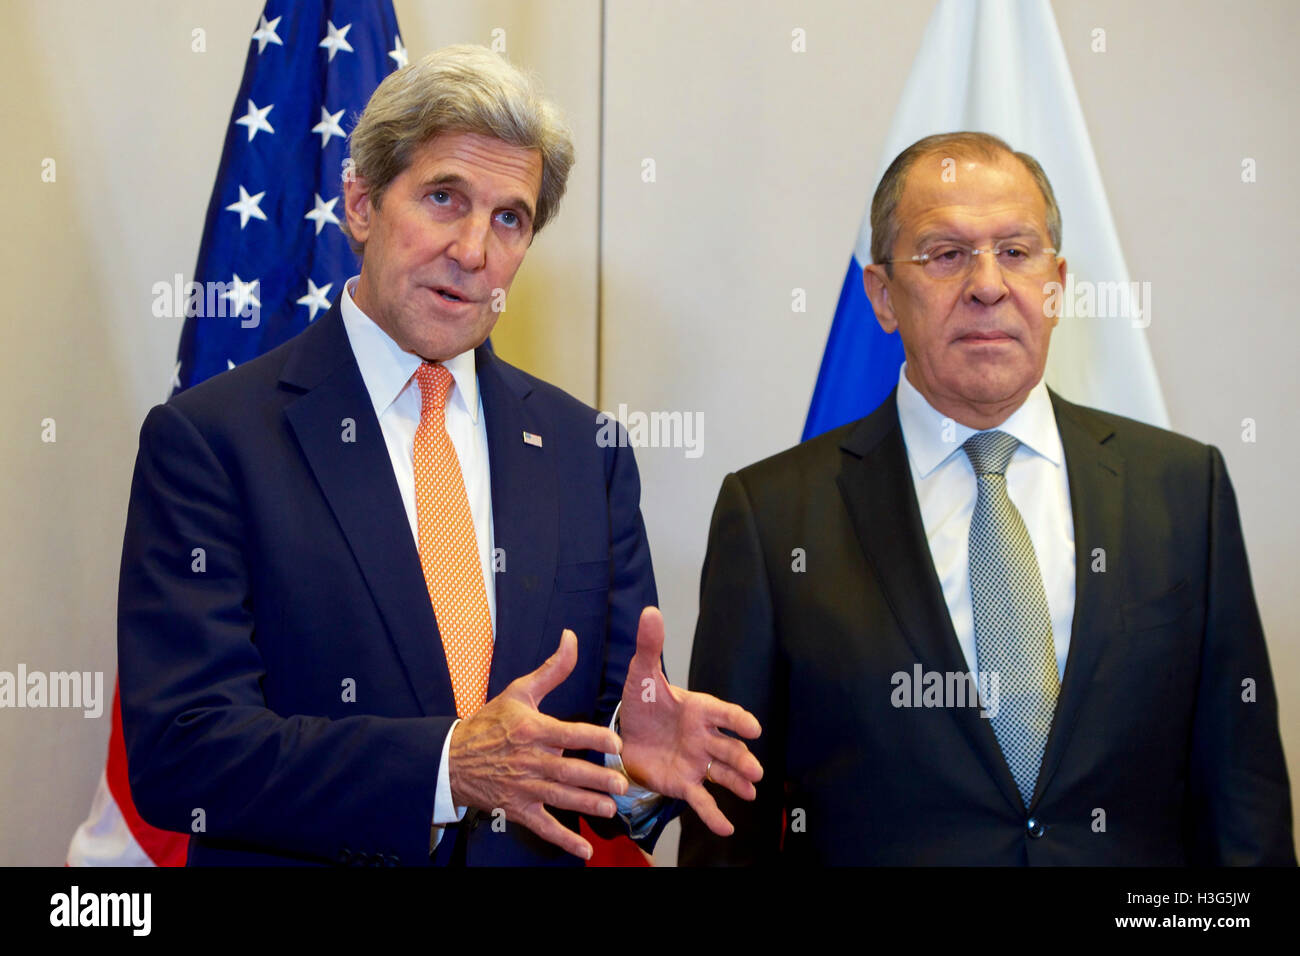 U.S. Secretary of State John Kerry, flanked by Russian Foreign Minister Sergey Lavrov, answers a reporter's question on September 9, 2016, at the Hotel President Wilson in Geneva, Switzerland, before they begin a bilateral meeting focused on Syria. Stock Photo